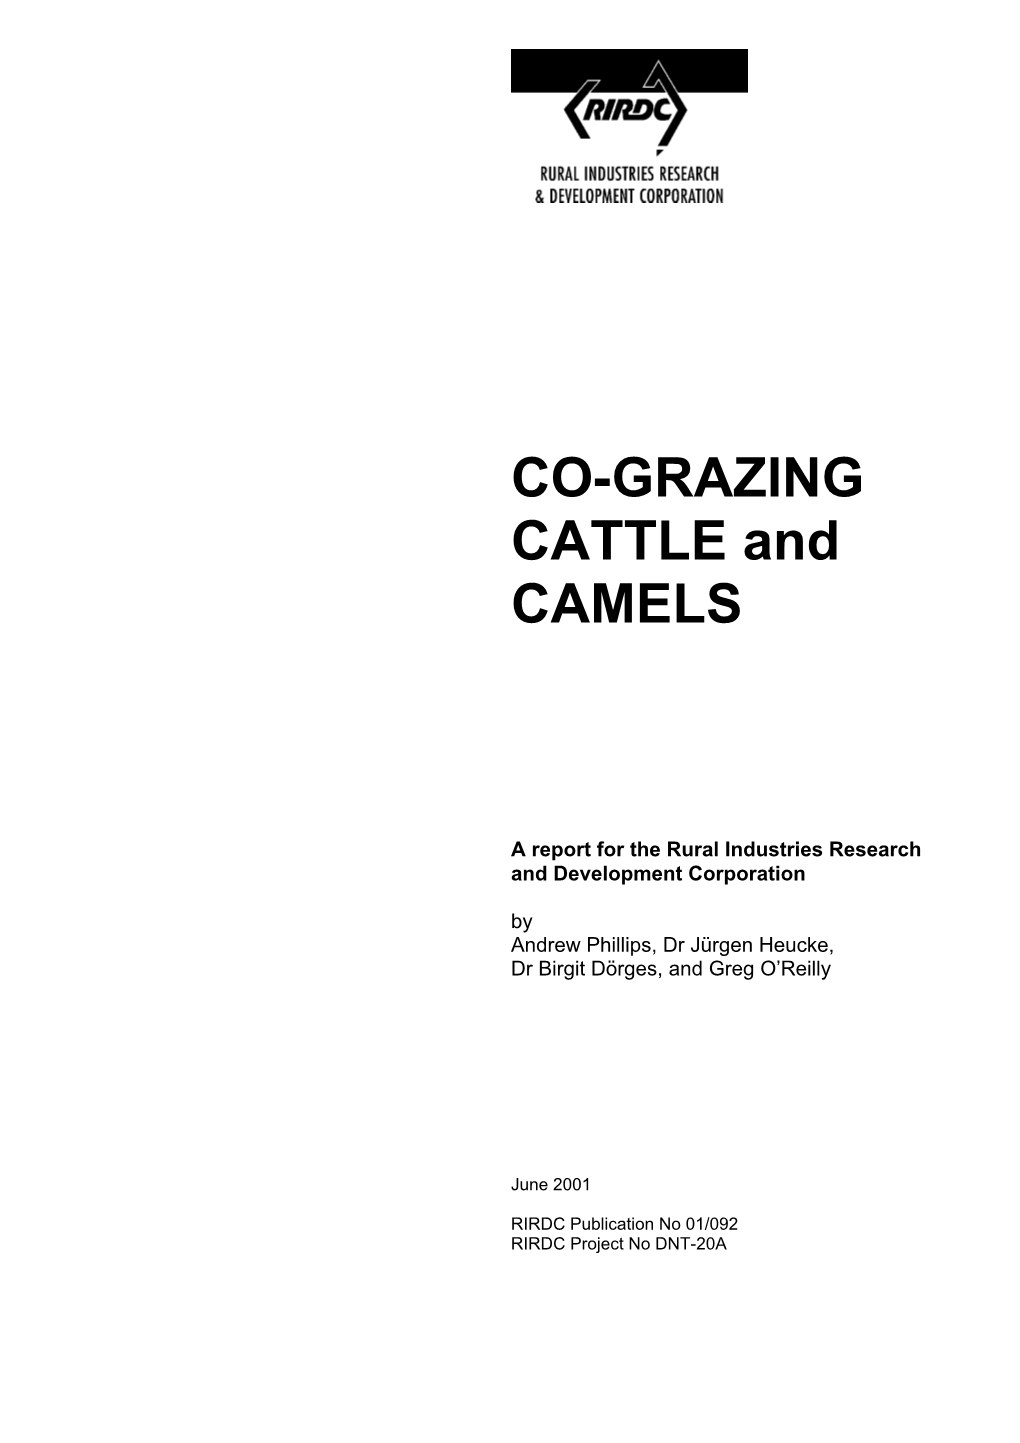 CO-GRAZING CATTLE and CAMELS